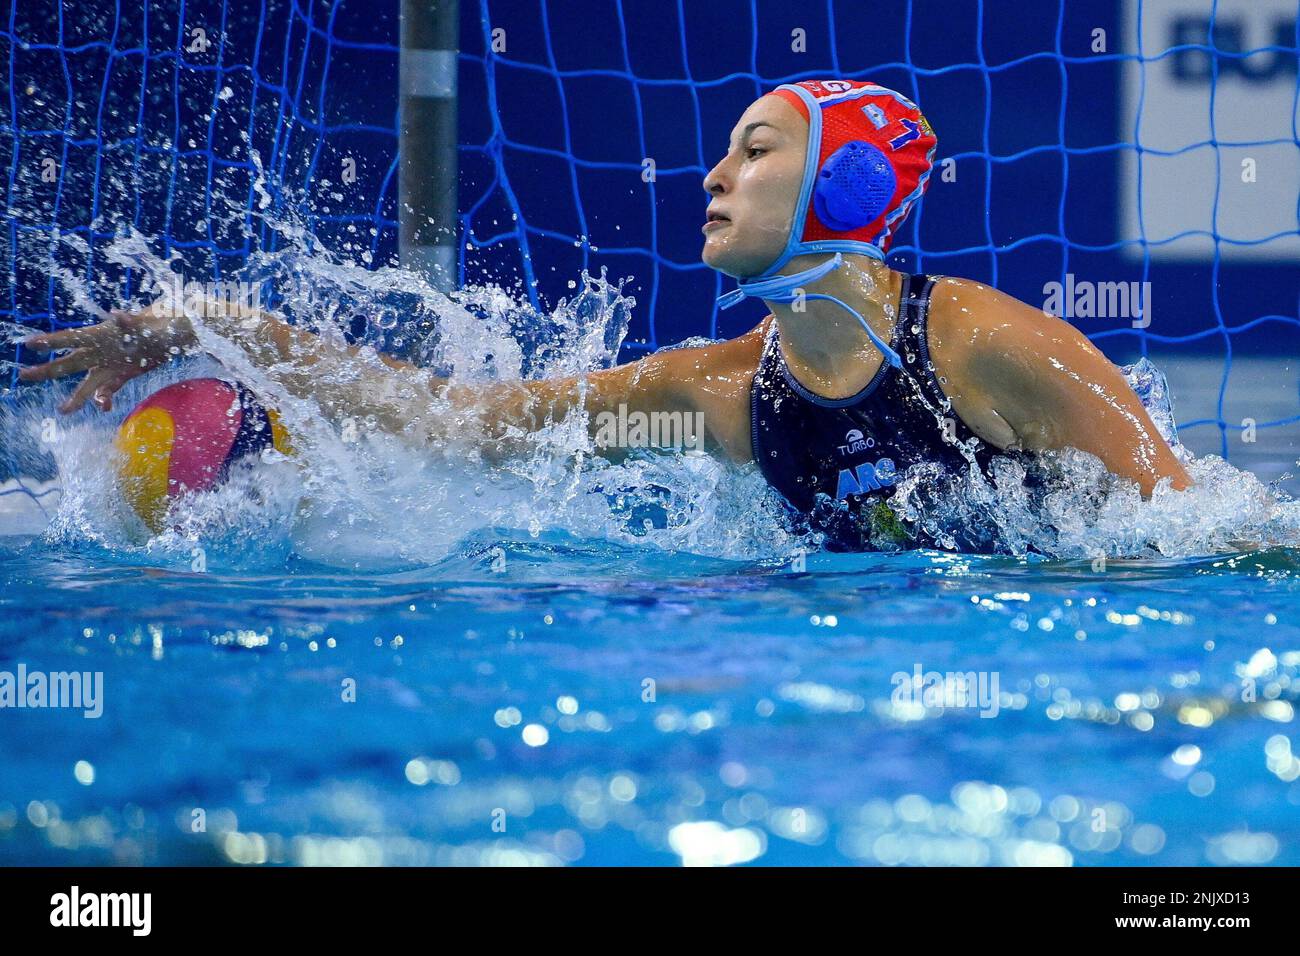 Goalkeeper Nahir Stegmayer of Argentina in action during the women's water  polo Group B third round United States vs Argentina match of the 19th FINA  World Championships in Debrecen, Hungary, Friday, June